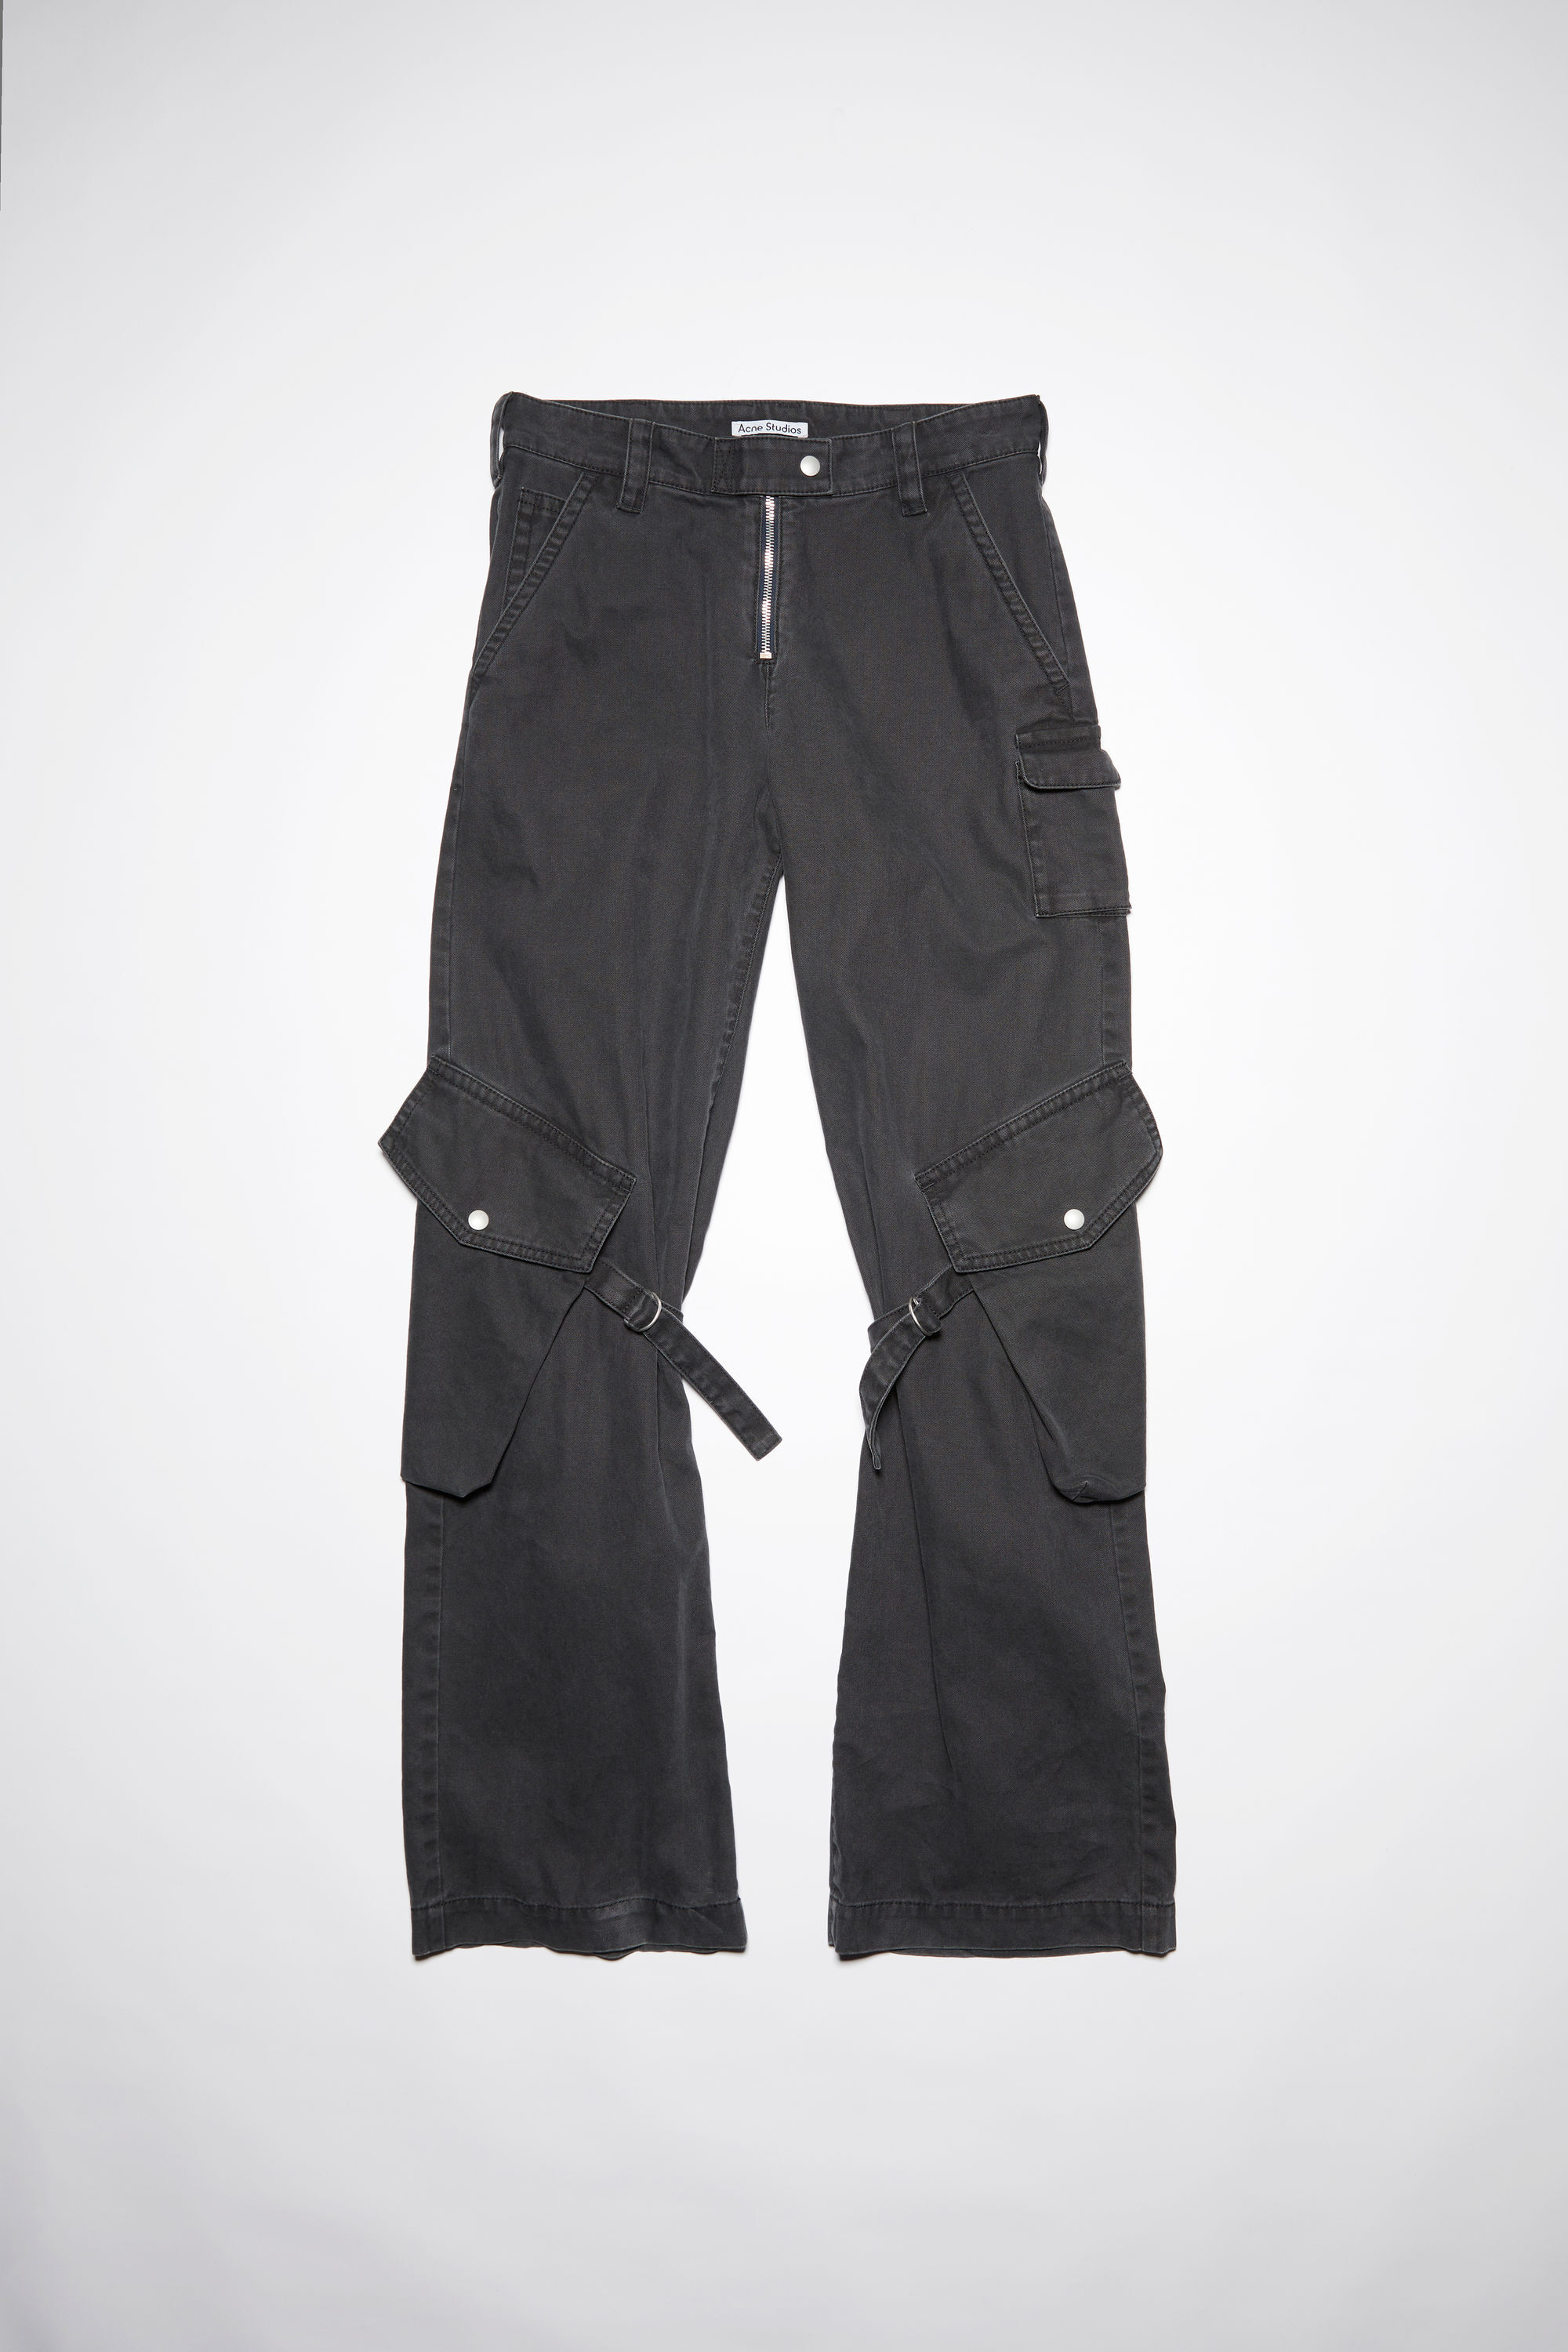 Acne Studios - Casual trousers - Washed Black